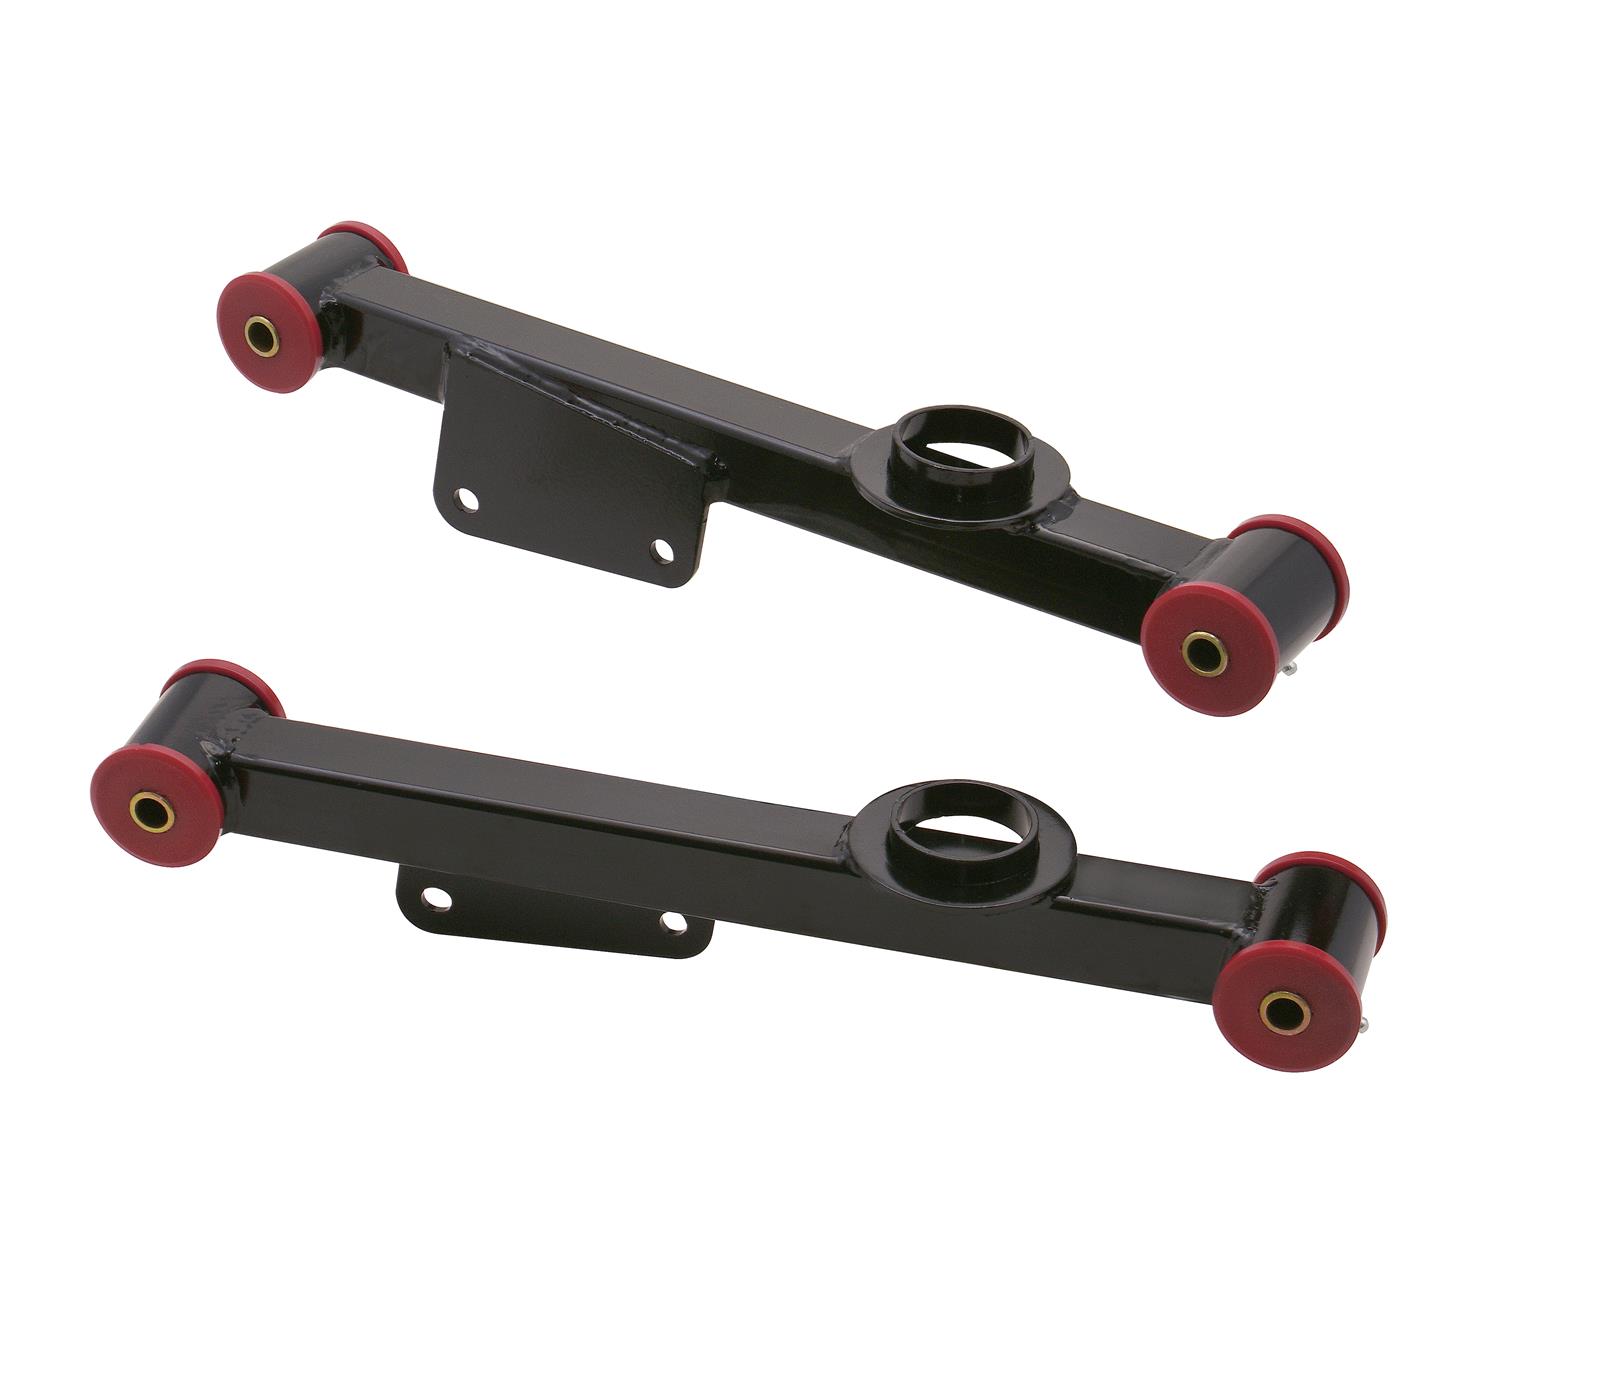 www.meinvoyager.de - LOWER CONTROL ARMS